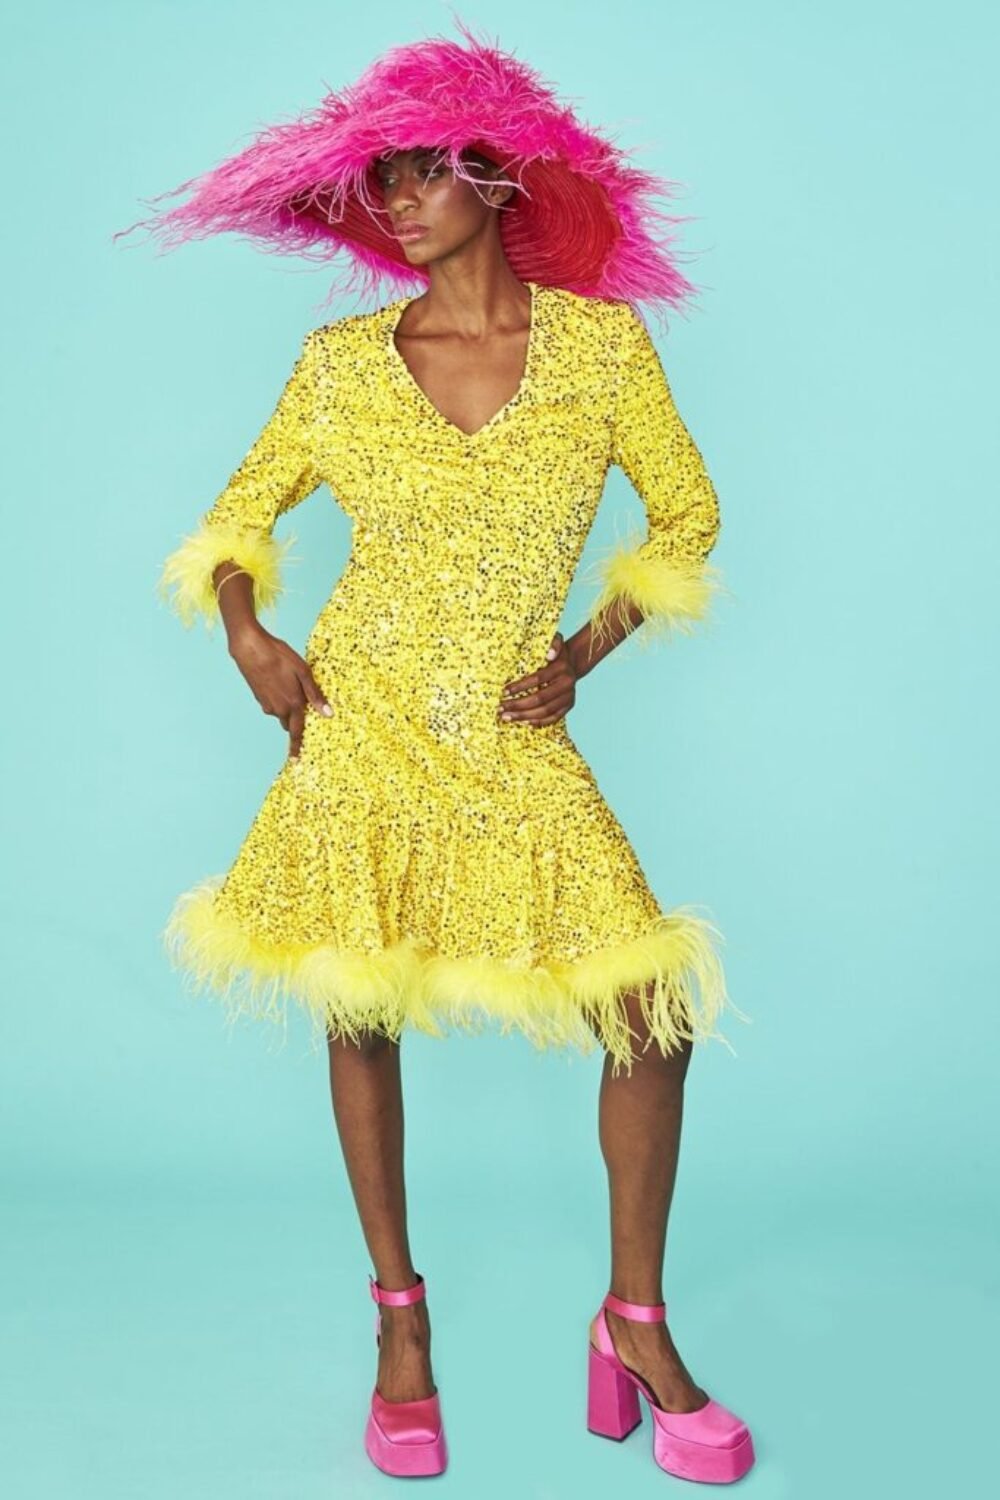 Shop Lux Yellow Sequin Skater Dress with Feather Trim and women's luxury and designer clothes at www.lux-apparel.co.uk